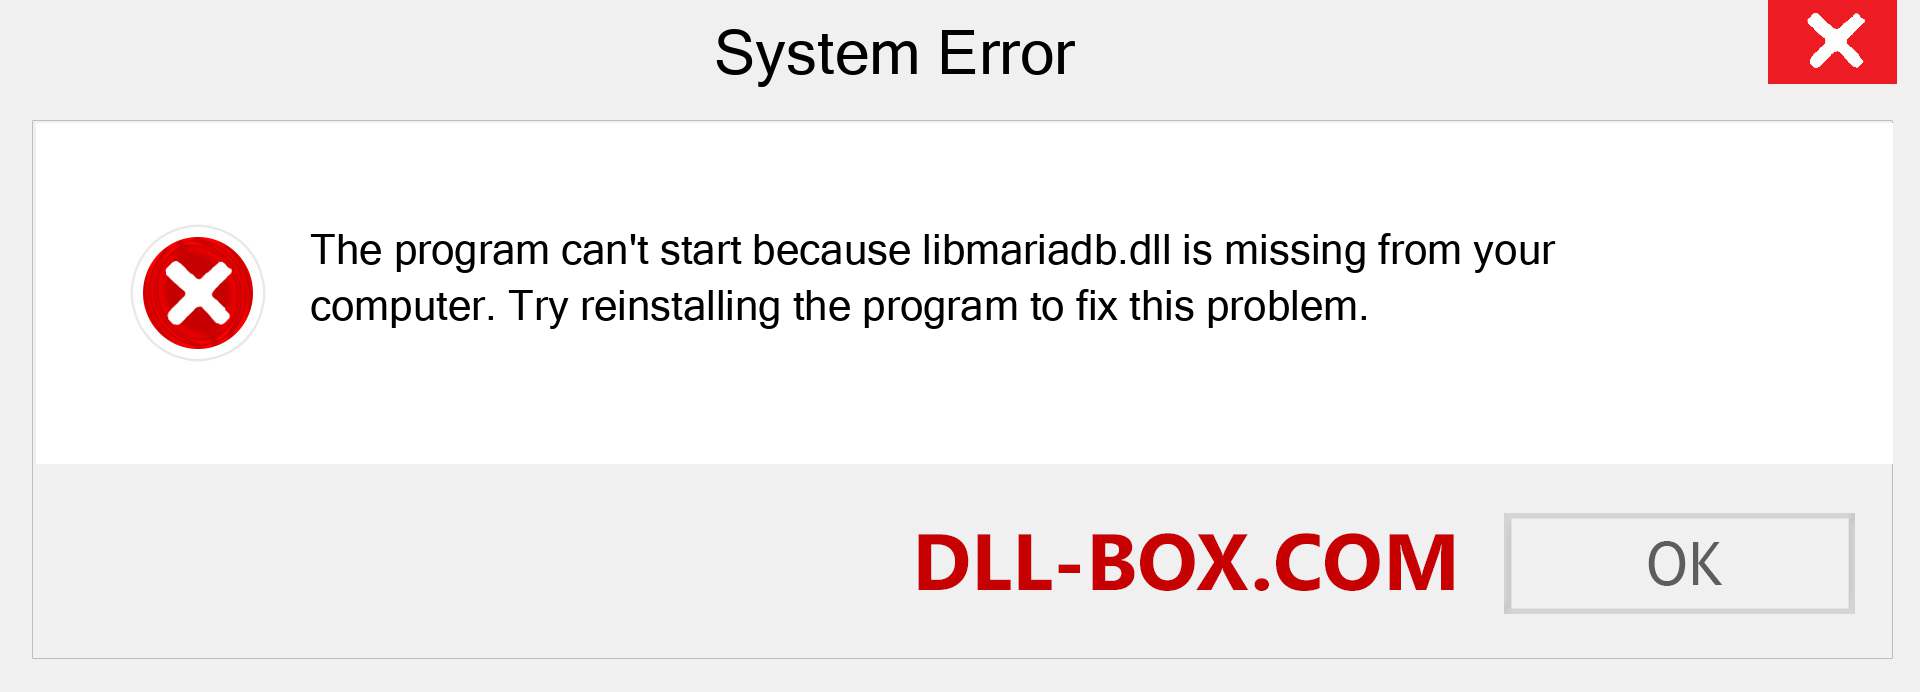  libmariadb.dll file is missing?. Download for Windows 7, 8, 10 - Fix  libmariadb dll Missing Error on Windows, photos, images